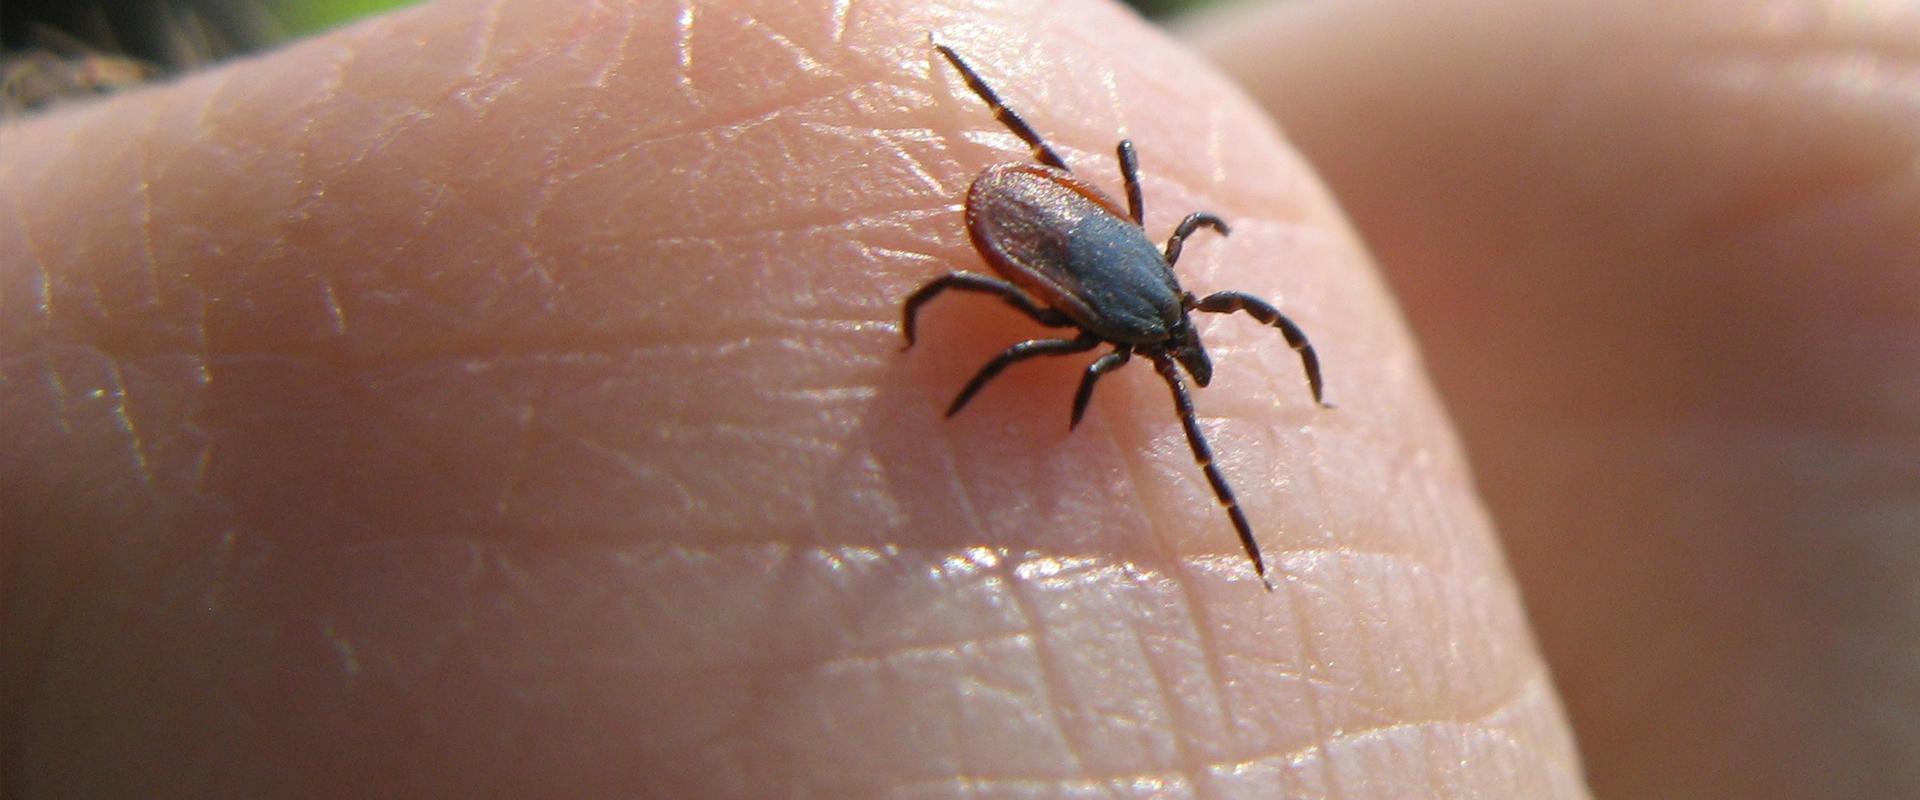 a tick on a finger